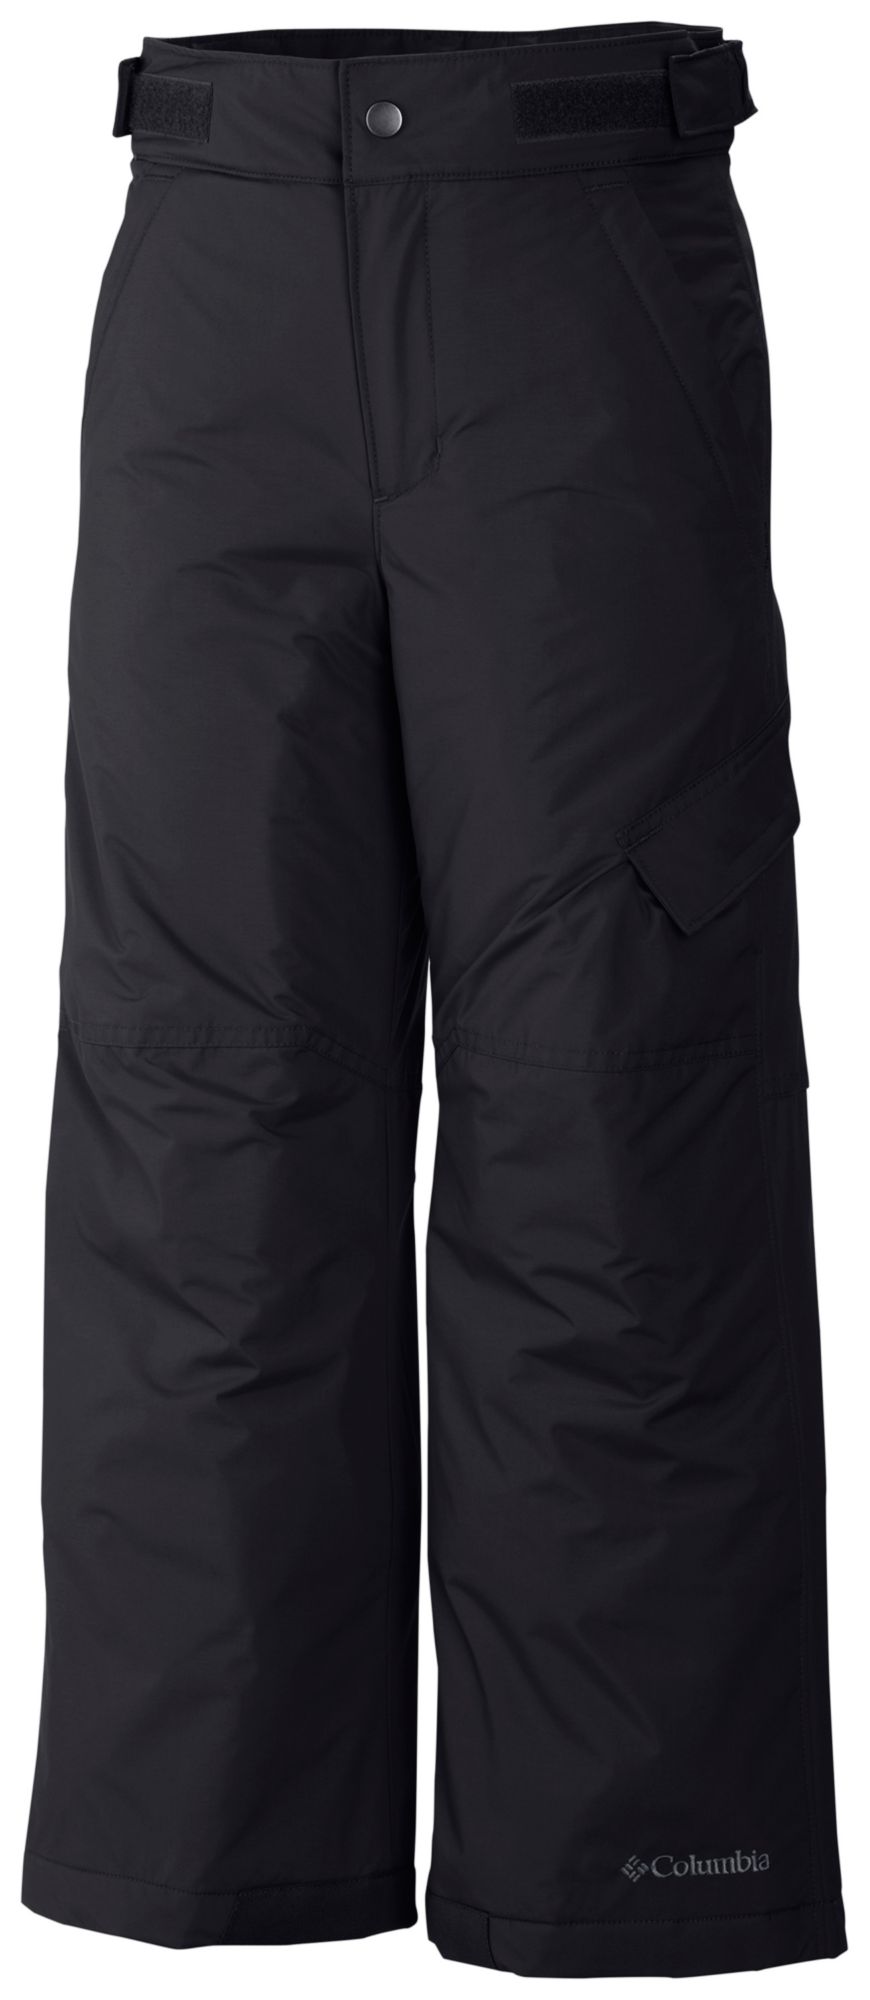 Photos - Ski Wear Columbia Youth Ice Slope II Insulated Pants, Boys', Small, Black 16CMBYCSL 